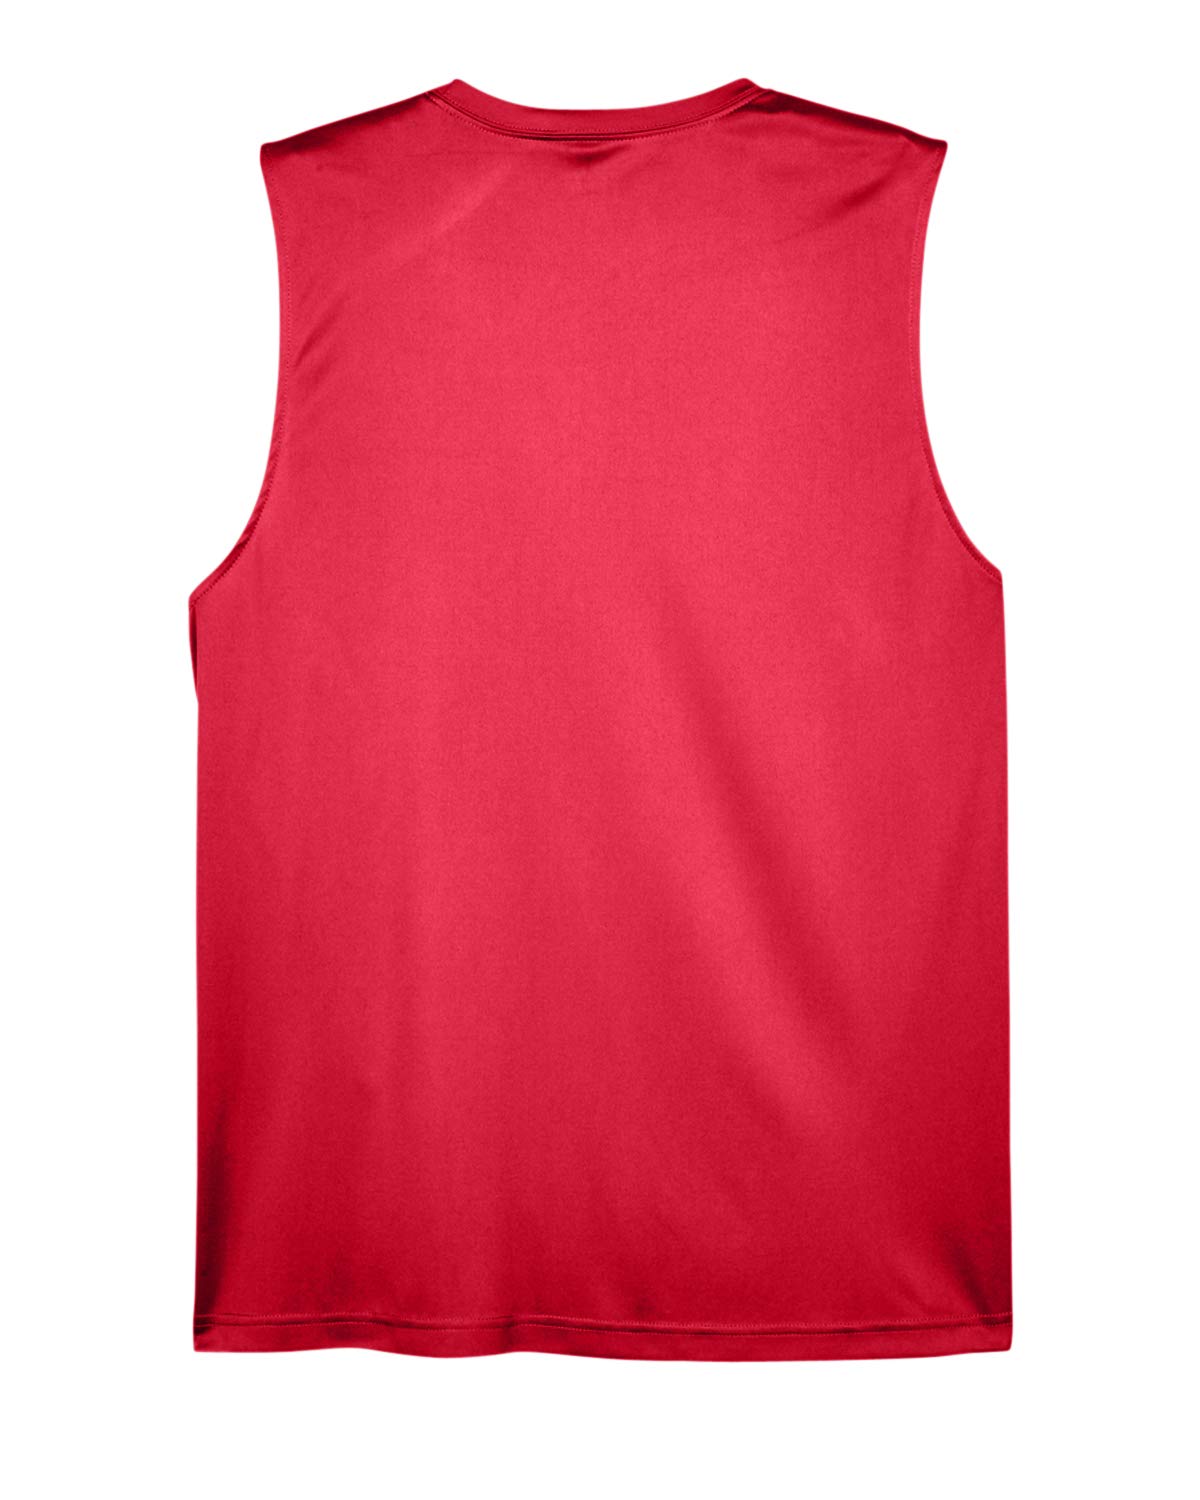 LIFEGUARD Officially Licensed Mens Performance Active Muscle Tank Moisture Wicking